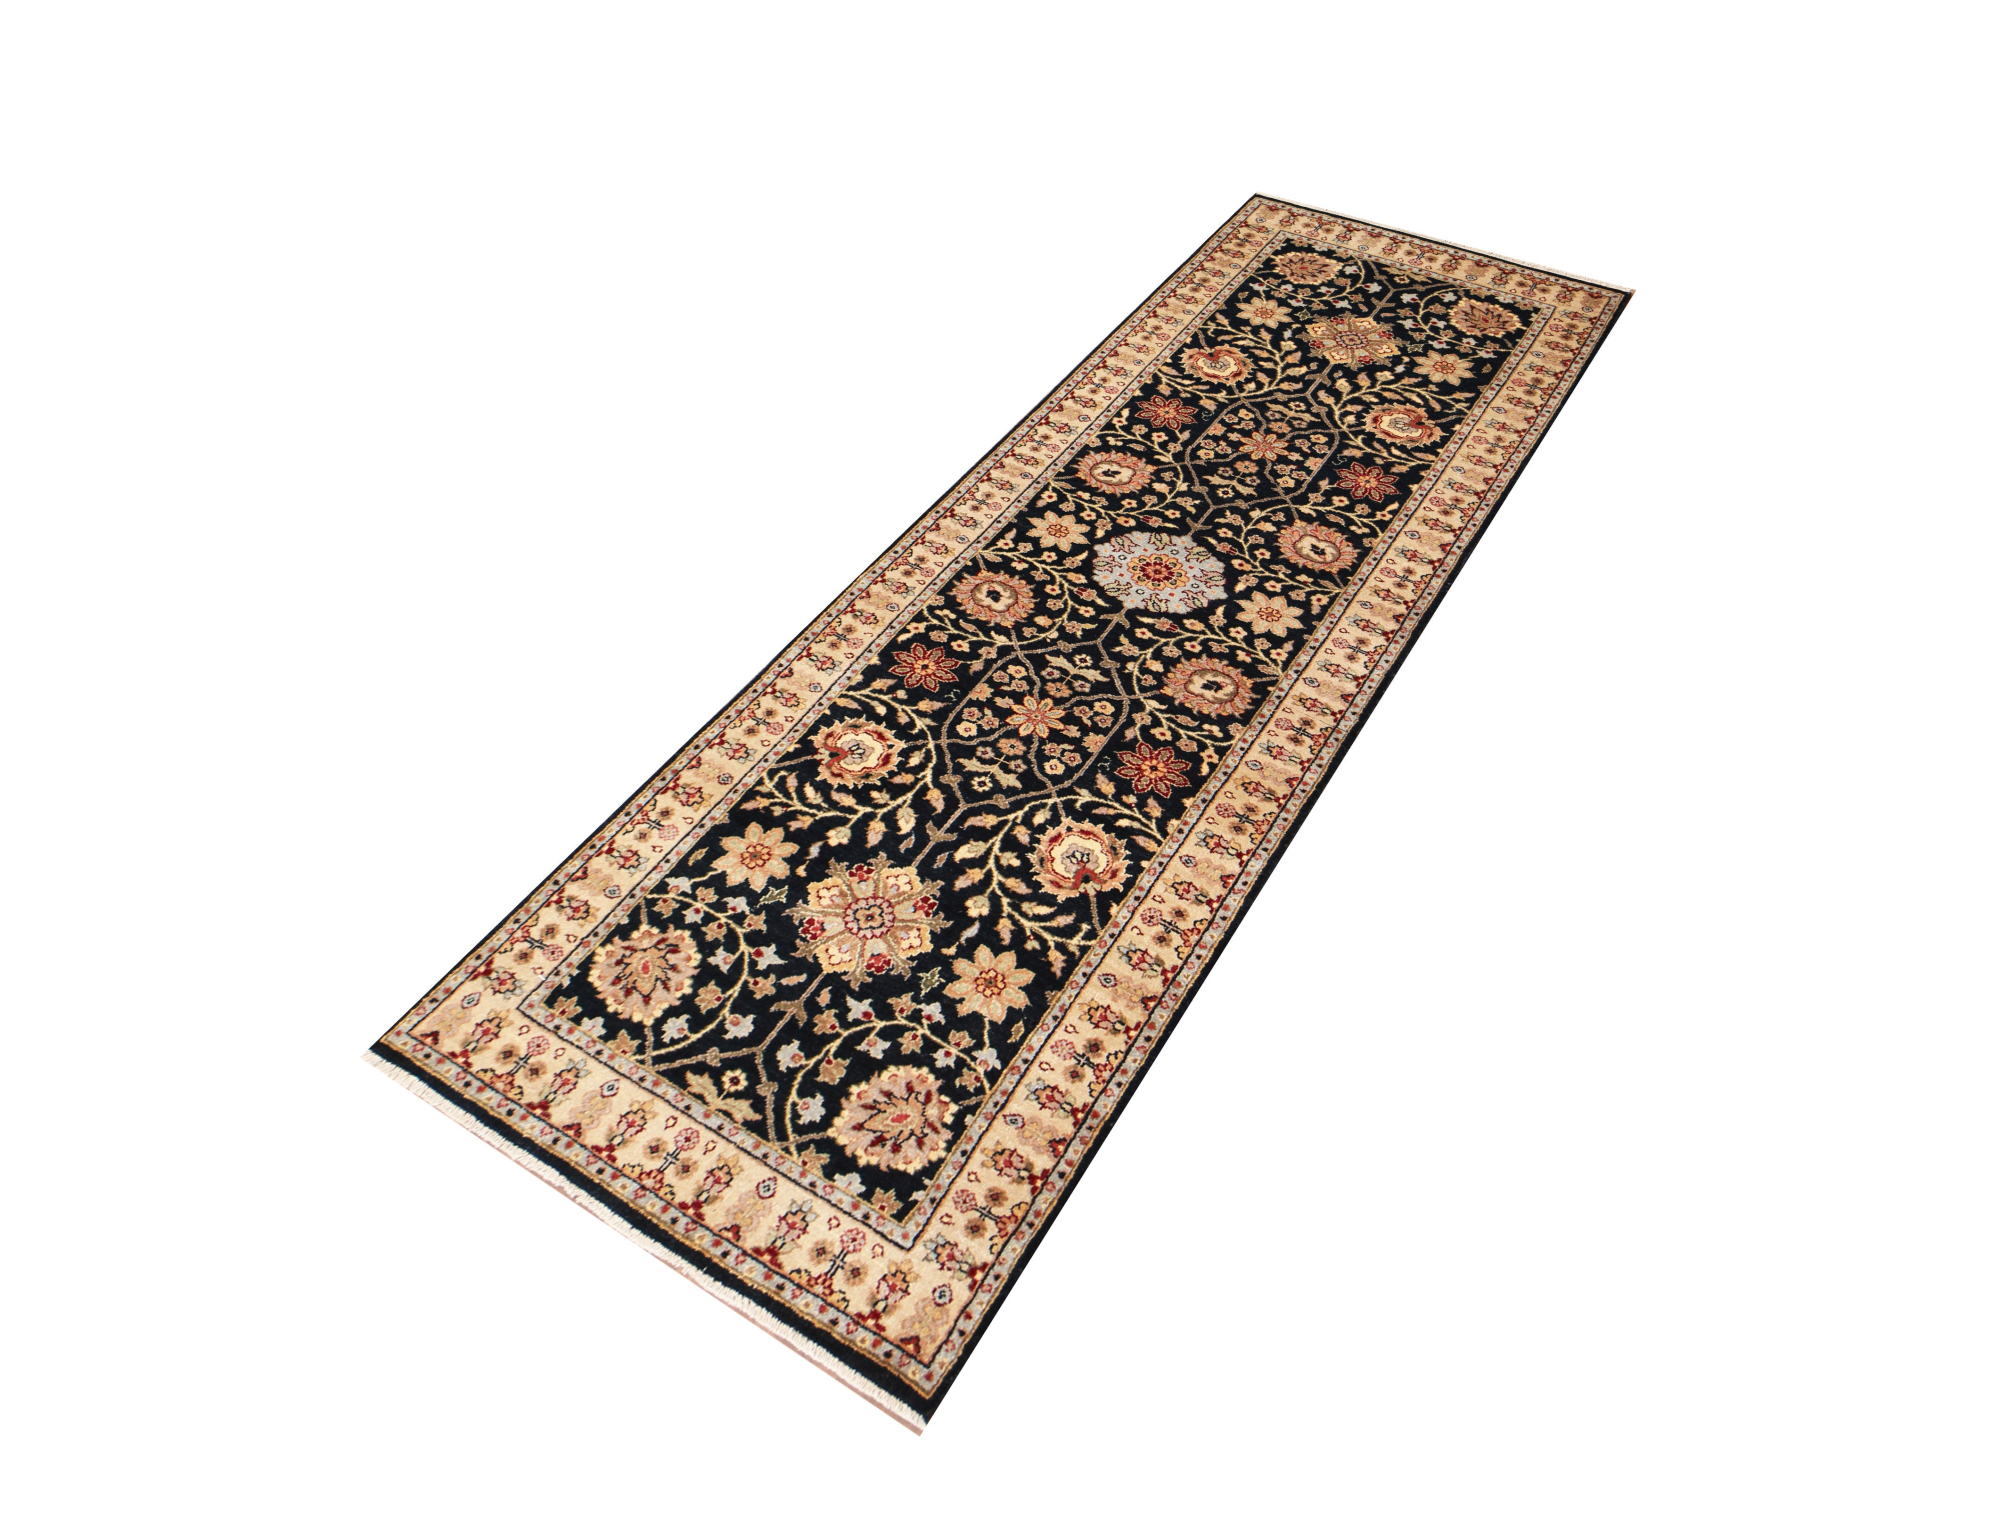 Ellora Indo Persian Black Hand Knotted Runner Rug 2'7